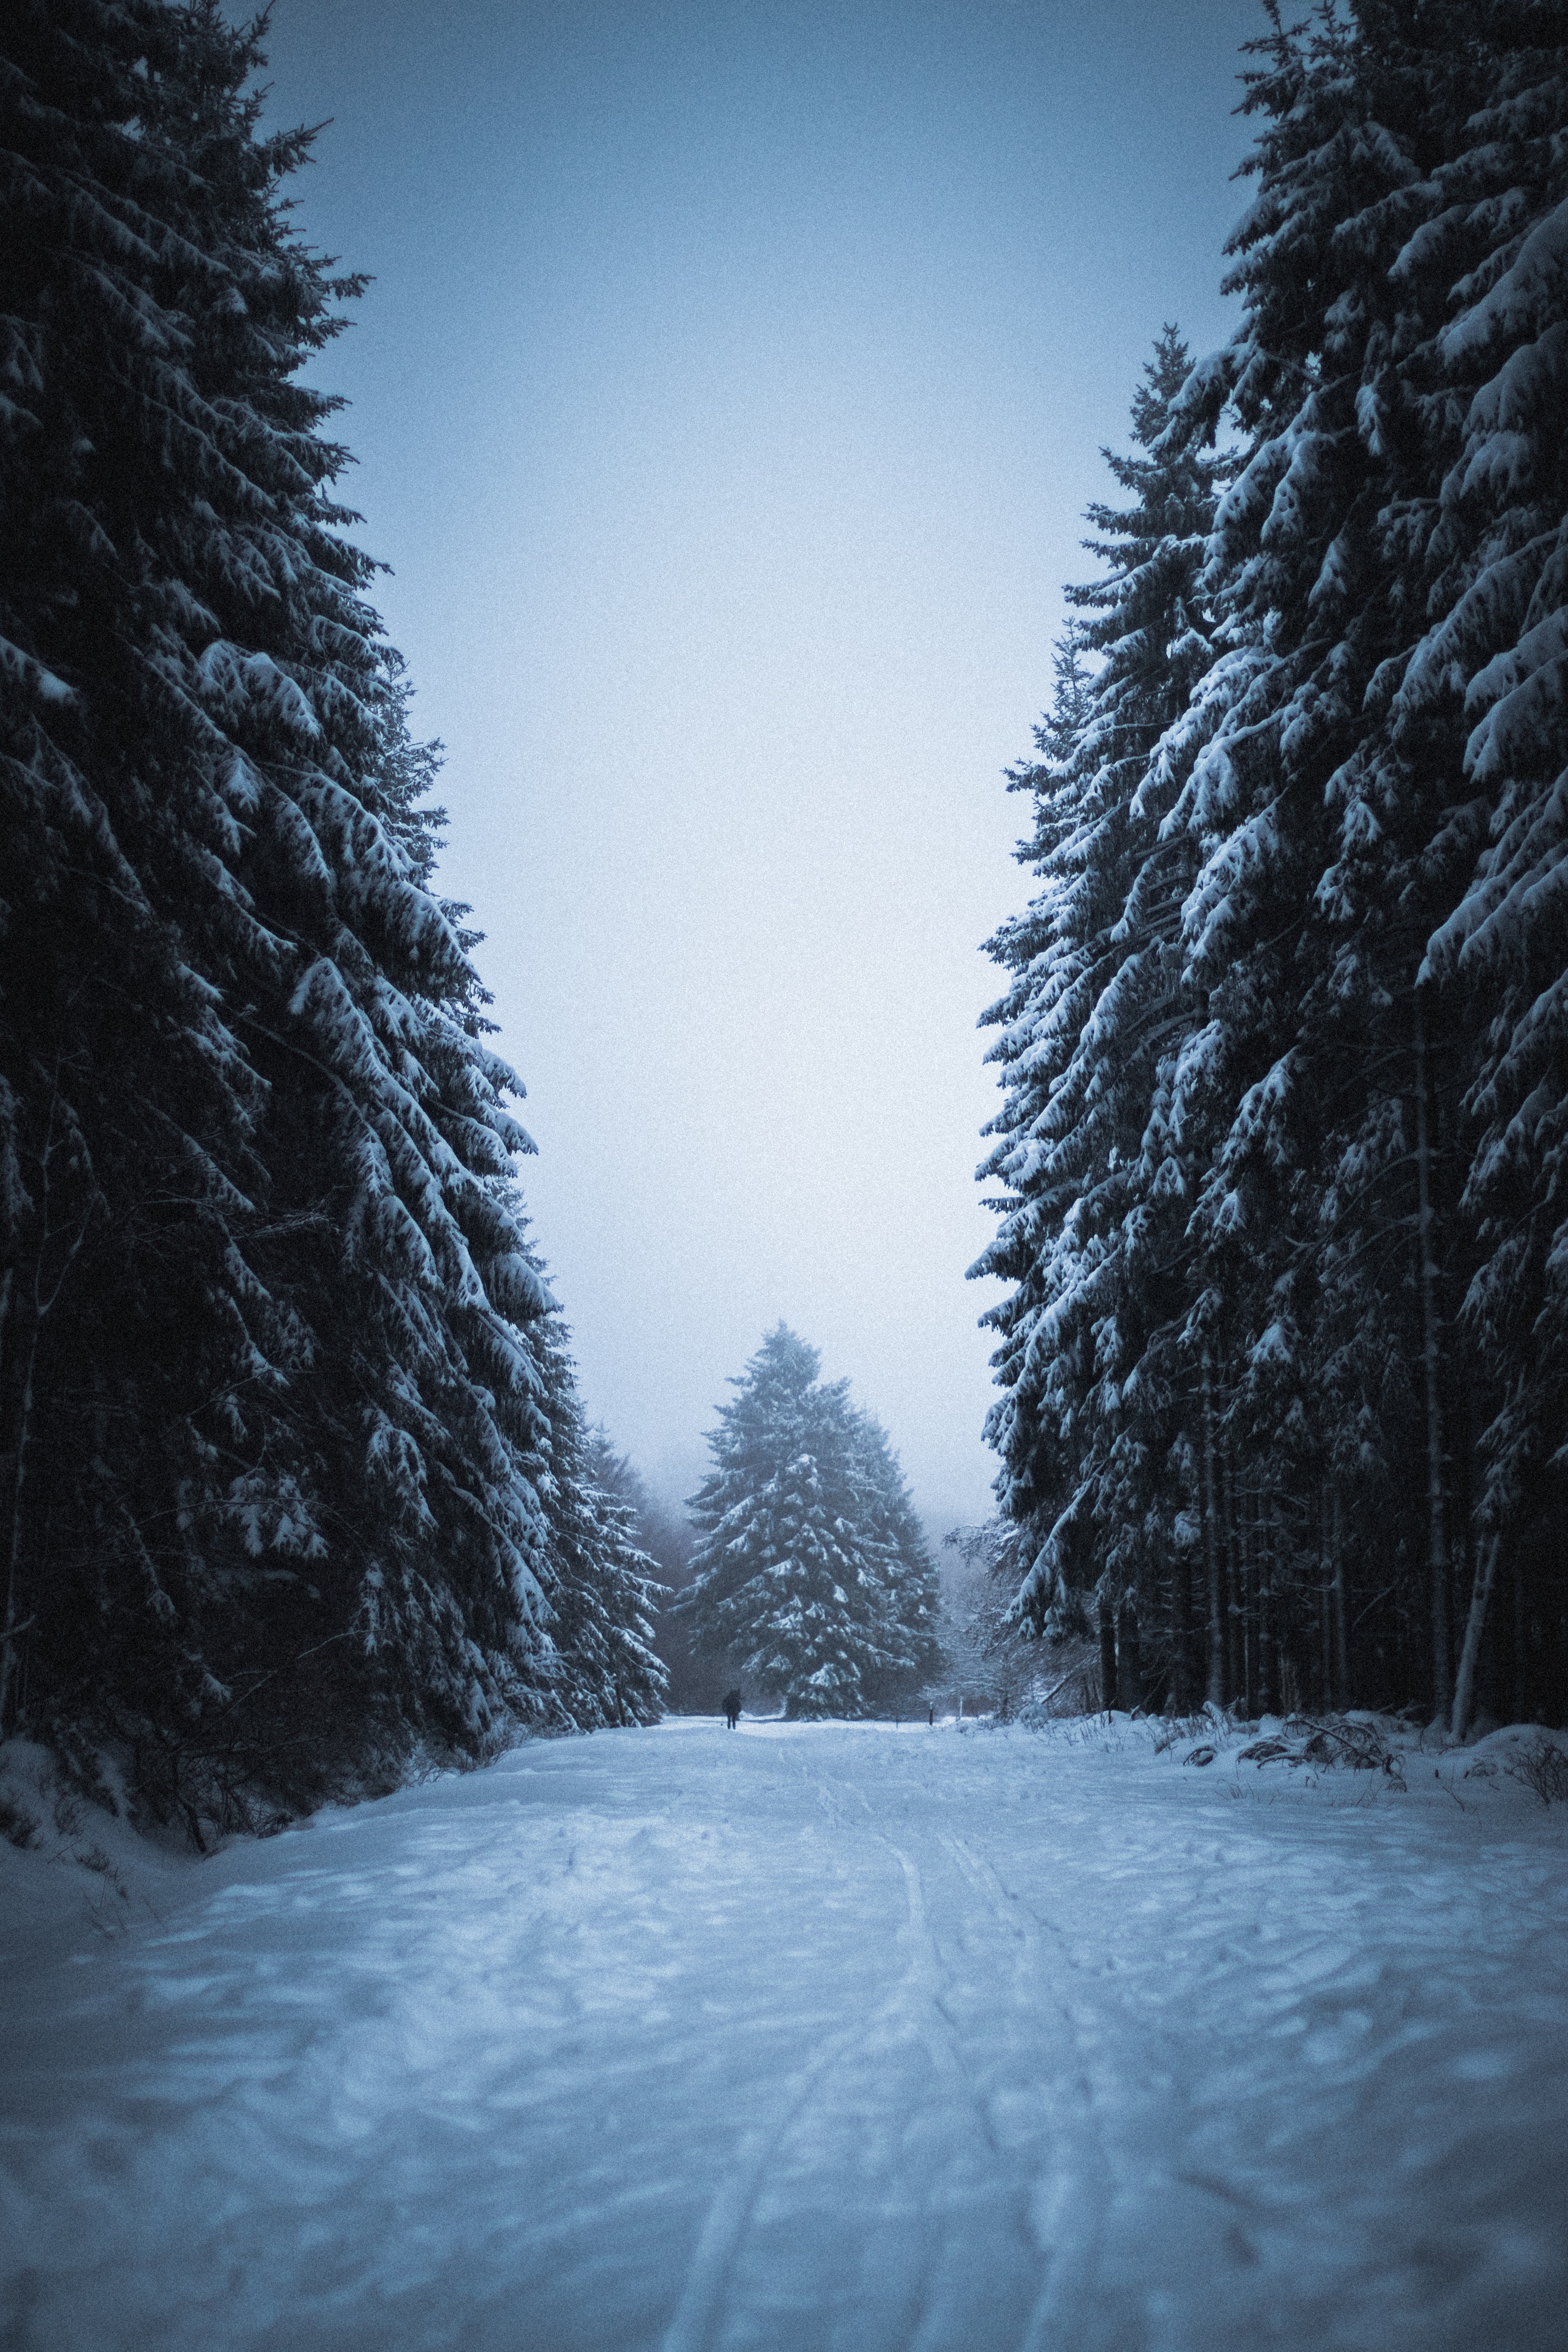 Snowy forest with evergreen trees in winter · Free